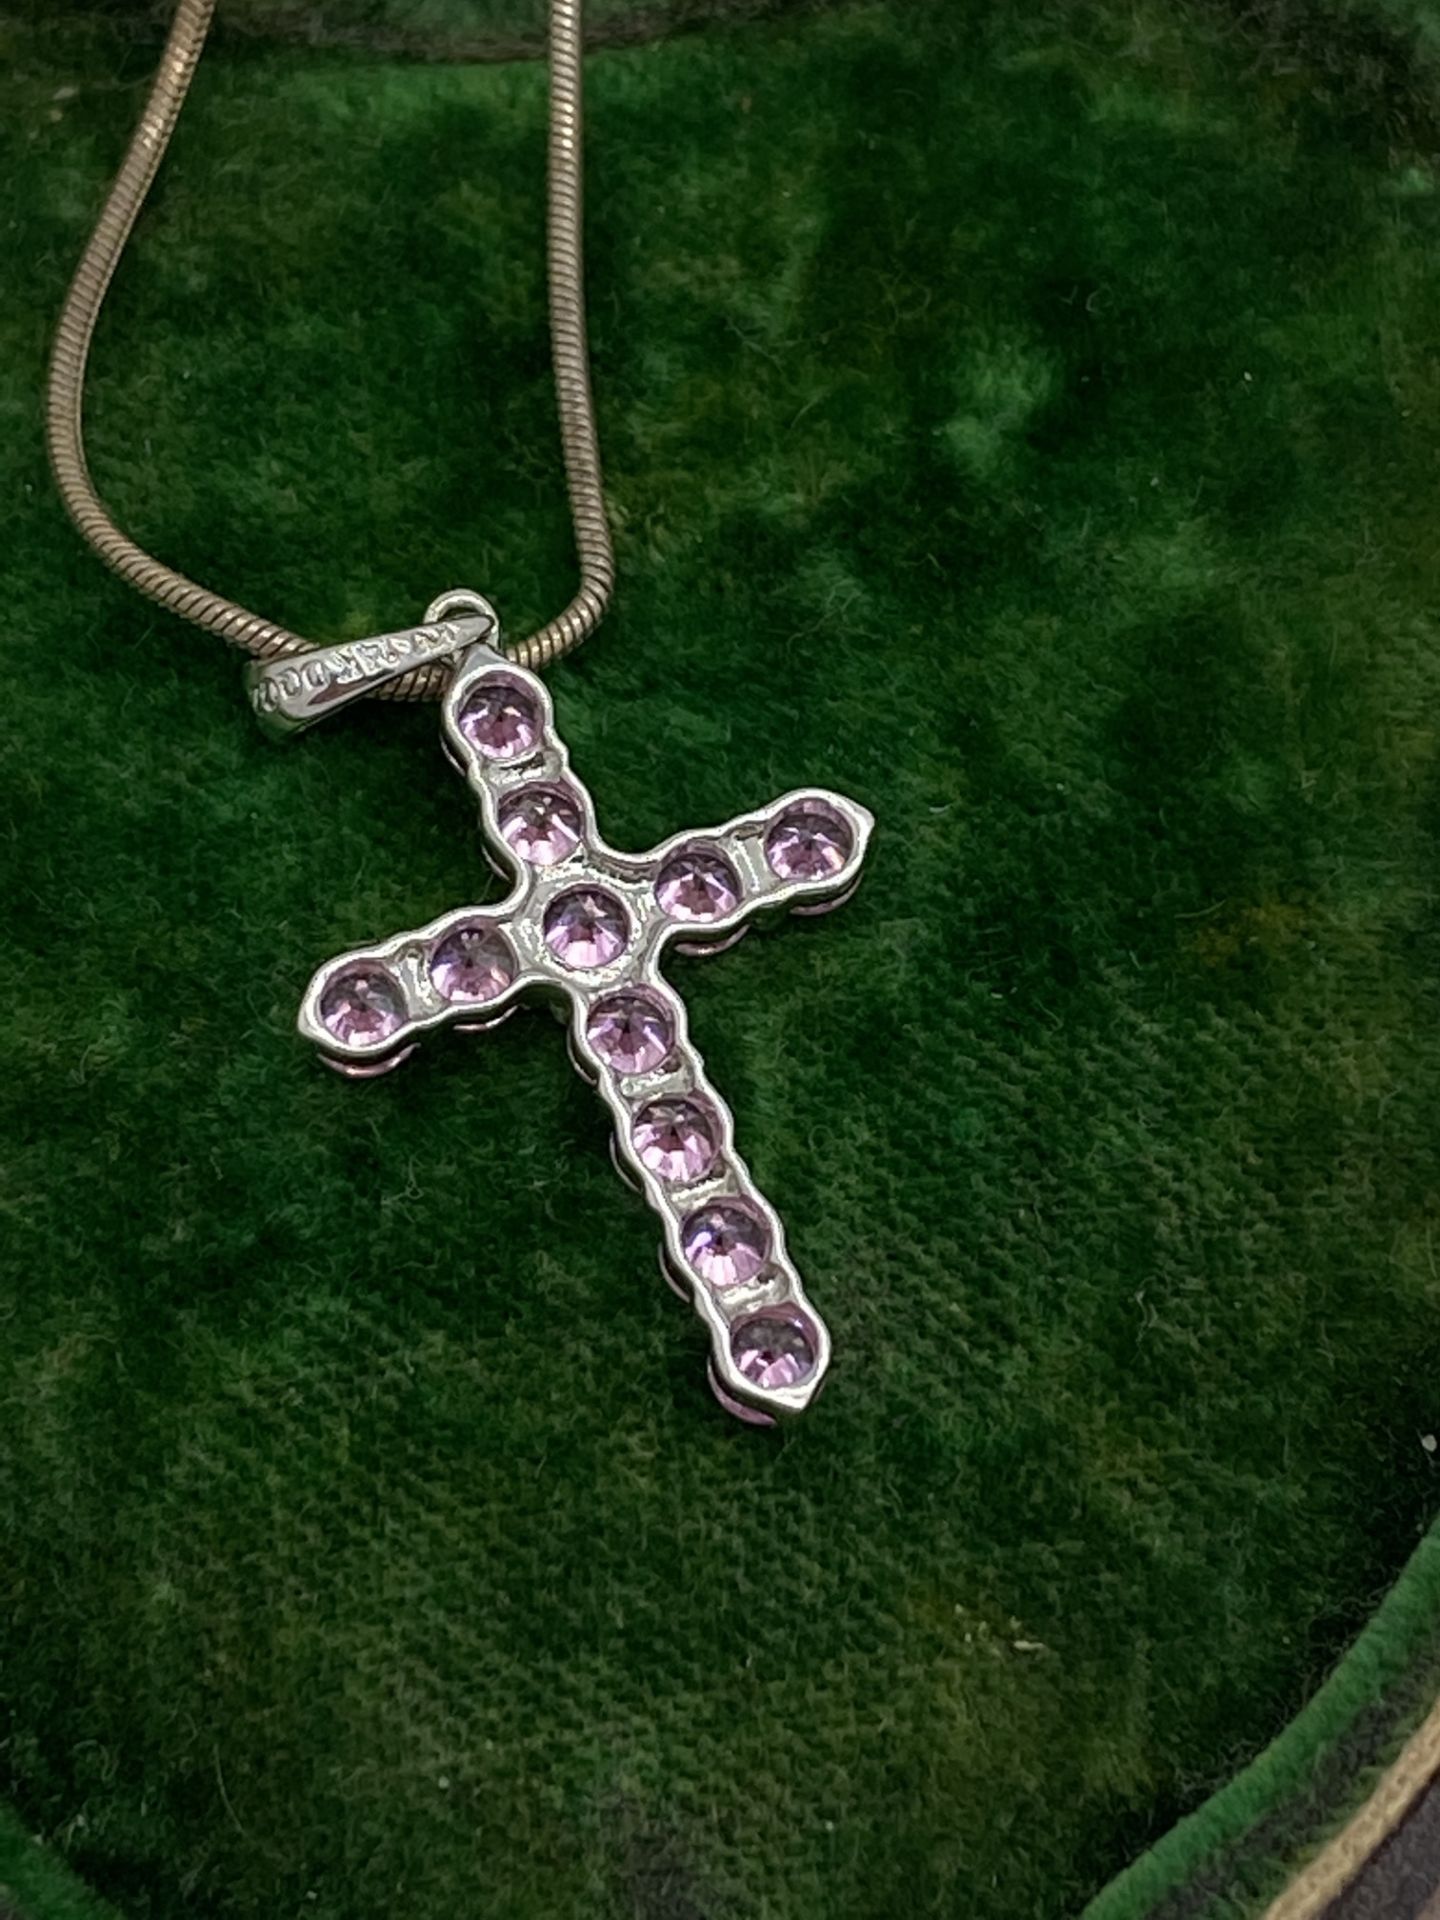 14ct WHITE GOLD PINK SAPPHIRE CROSS PENDANT WITH 925 CHAIN - Image 3 of 3